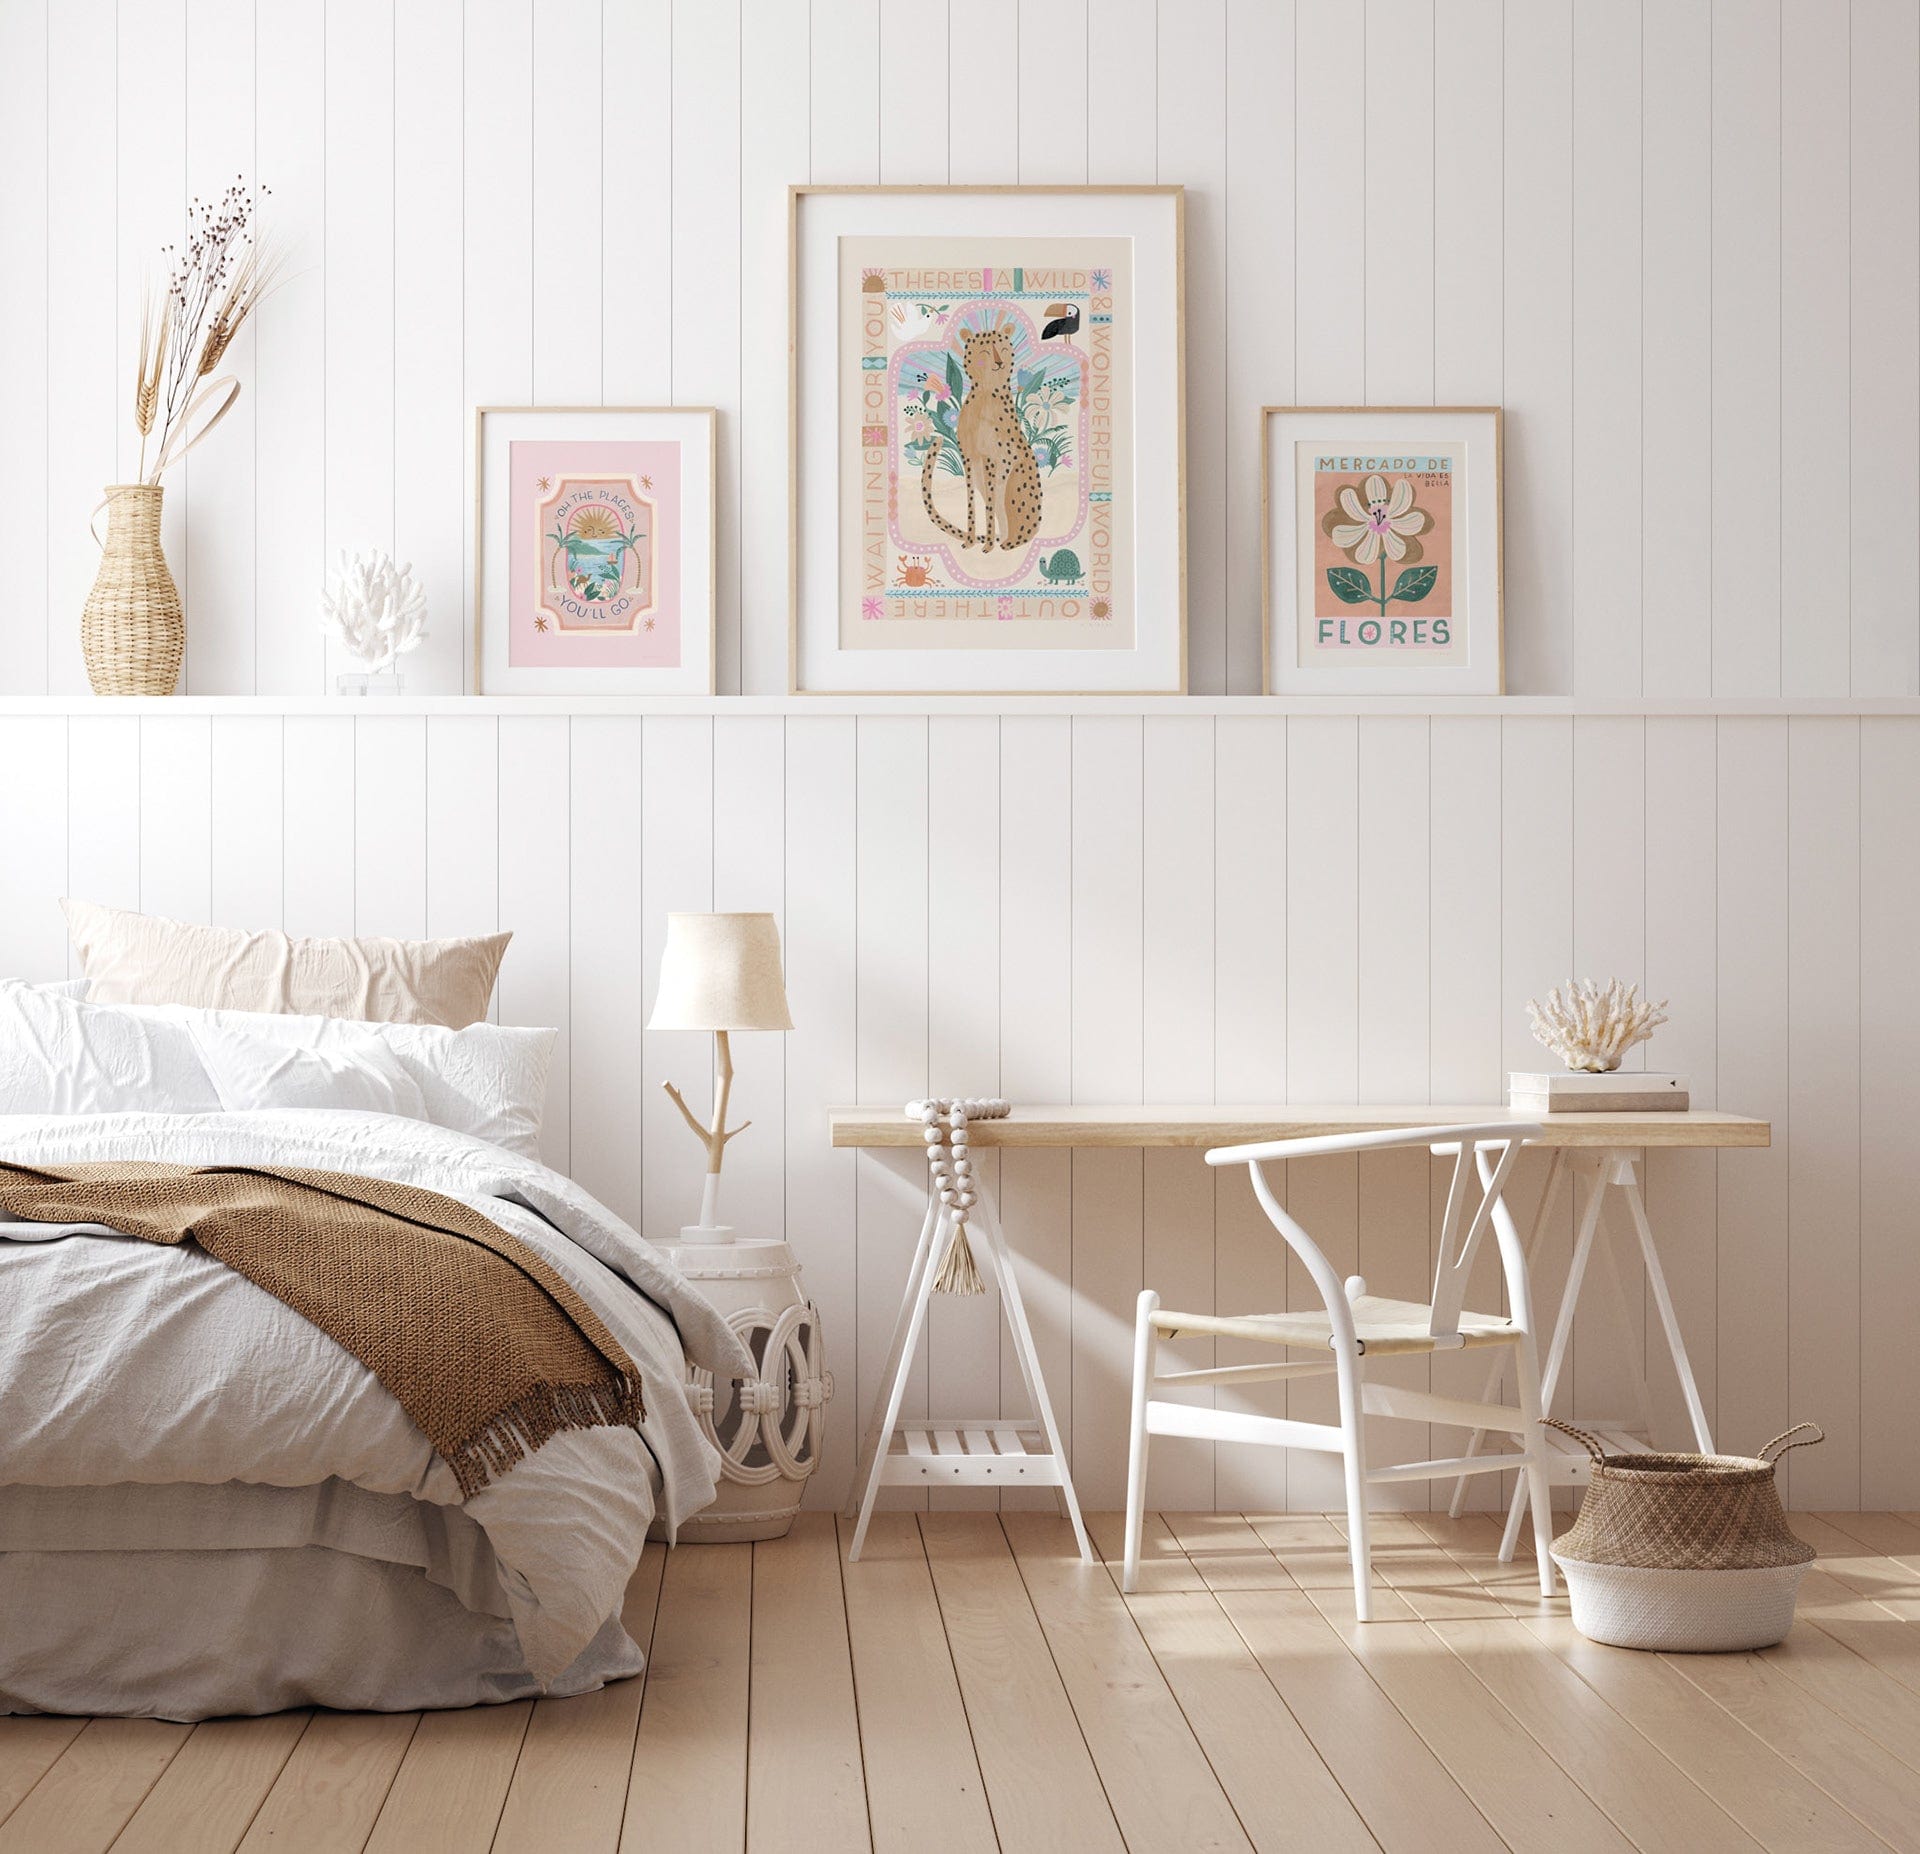 A scandi style bedroom showing a comfy bed with a white barrel night stand, and a white and light wood trestle table desk with a white chair and basket on the floor. On the shelf behind the bed are 3 art prints in light wood frames, the large print in the centre being our wild, wonderful, world leopard art print, and either side are smaller art prints, our oh, the places you go and mercado de flores.